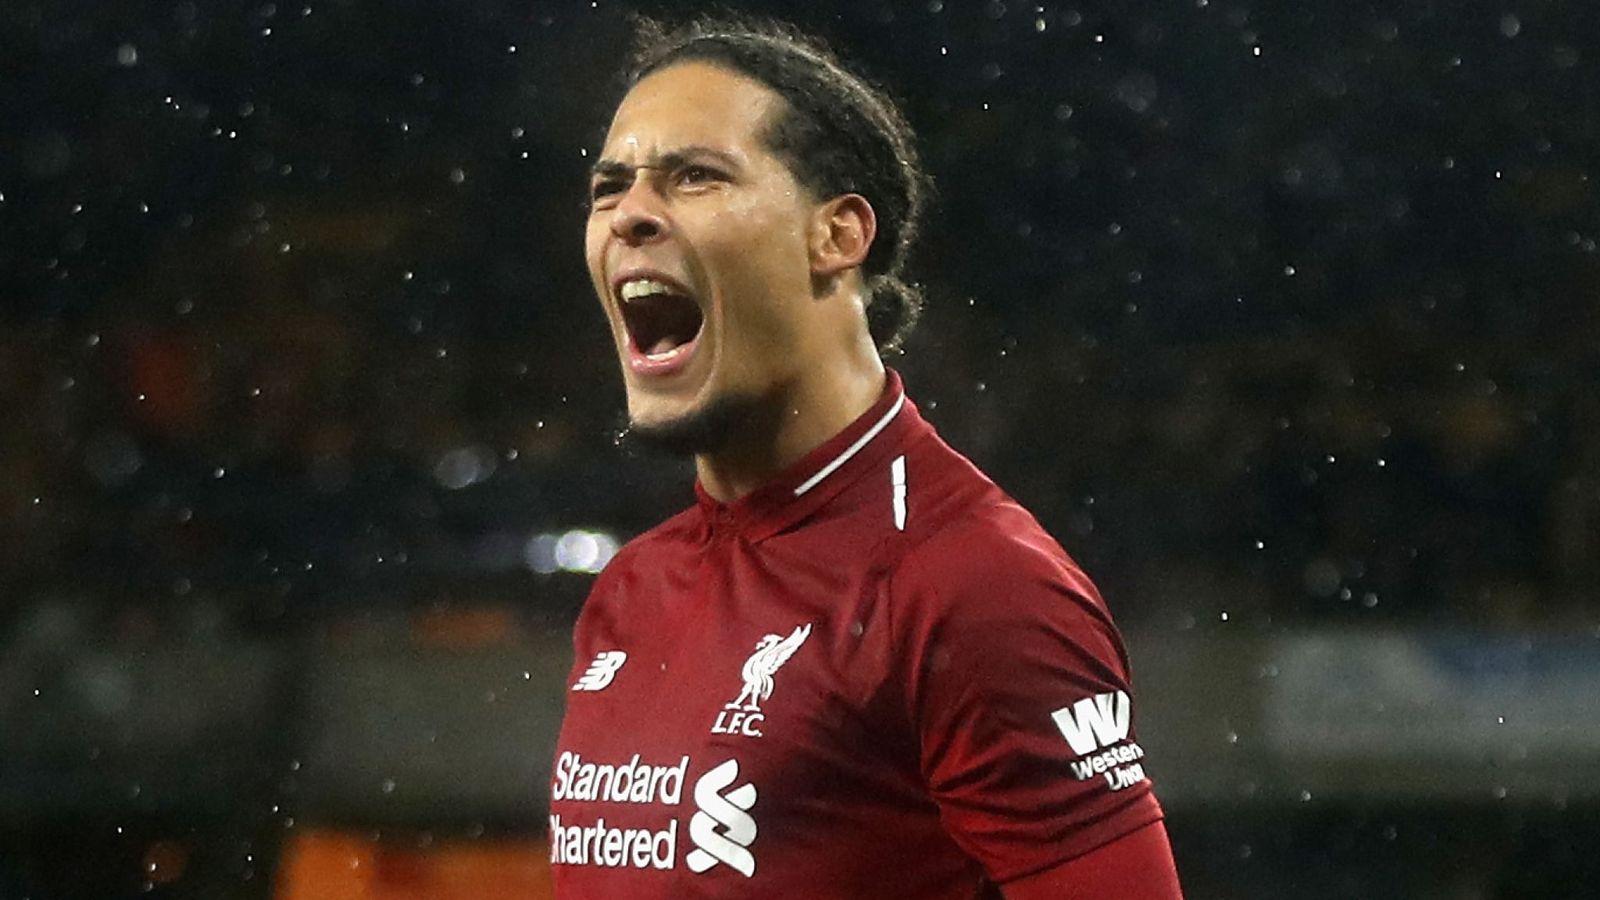 Gary Neville: Virgil van Dijk is my PFA Player of the Year